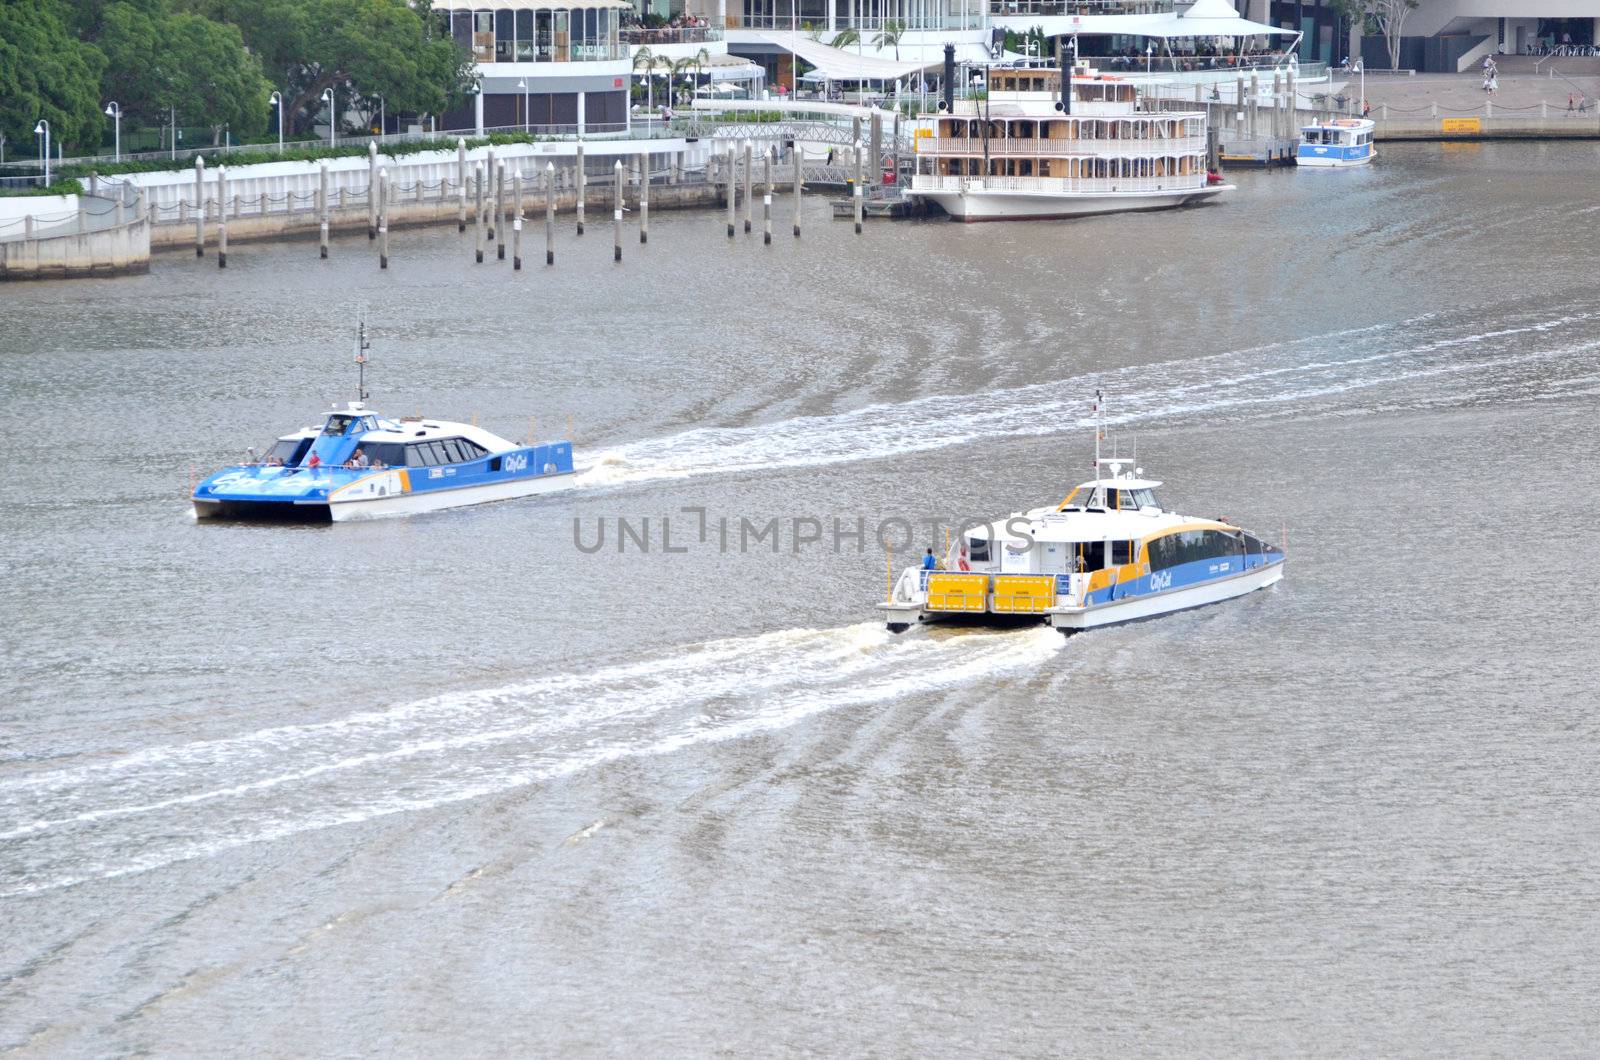 Passing Cats. Brisbane City Cat. Catamarans are a popular mode of public transport in Brisbane which is often referred to as the River City.